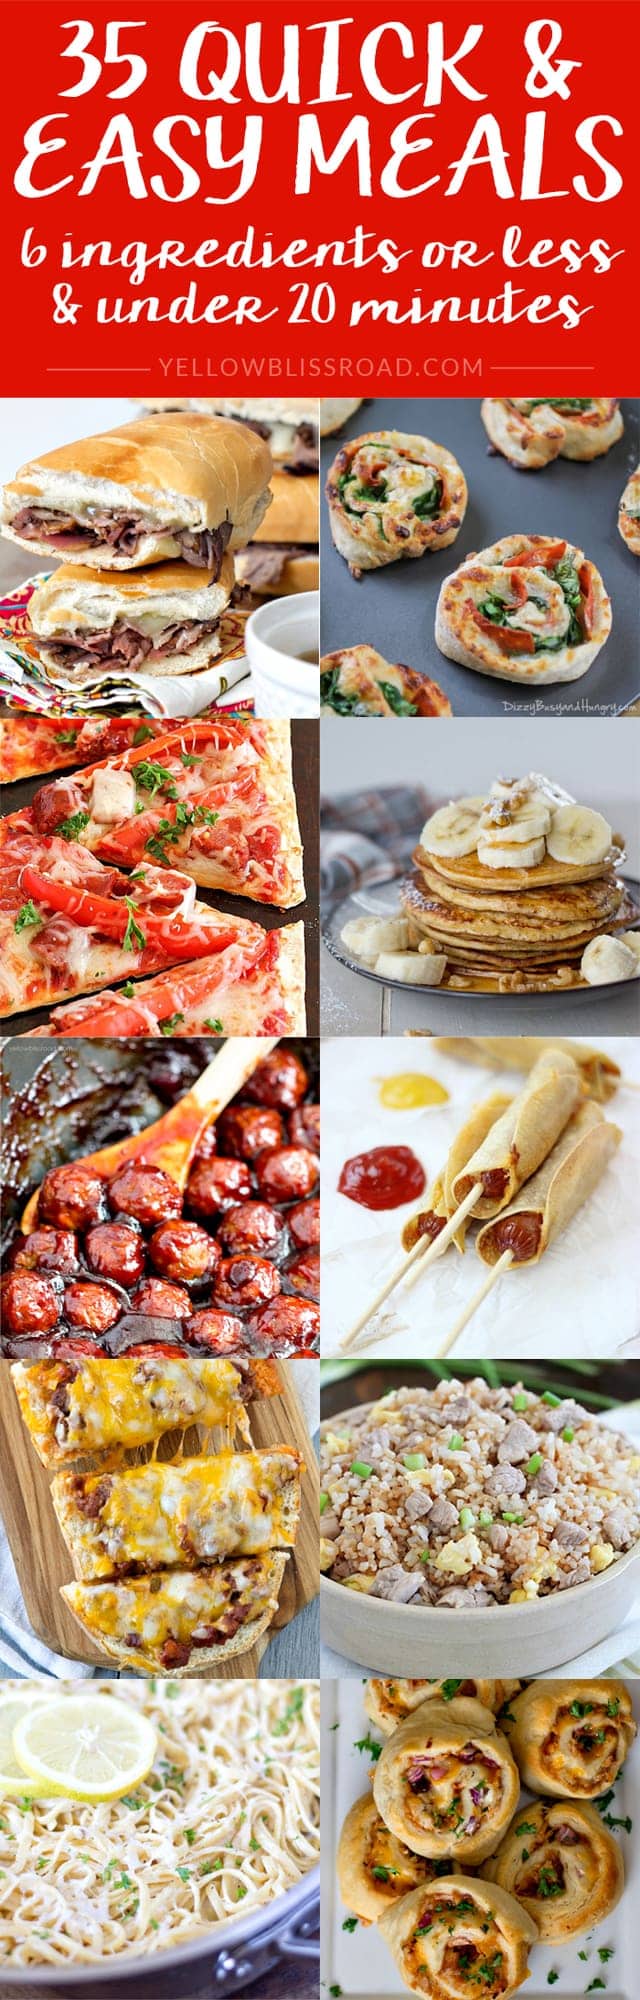 35 Quick and Easy Meals - with 6 ingredients or less and ready in 20 minutes